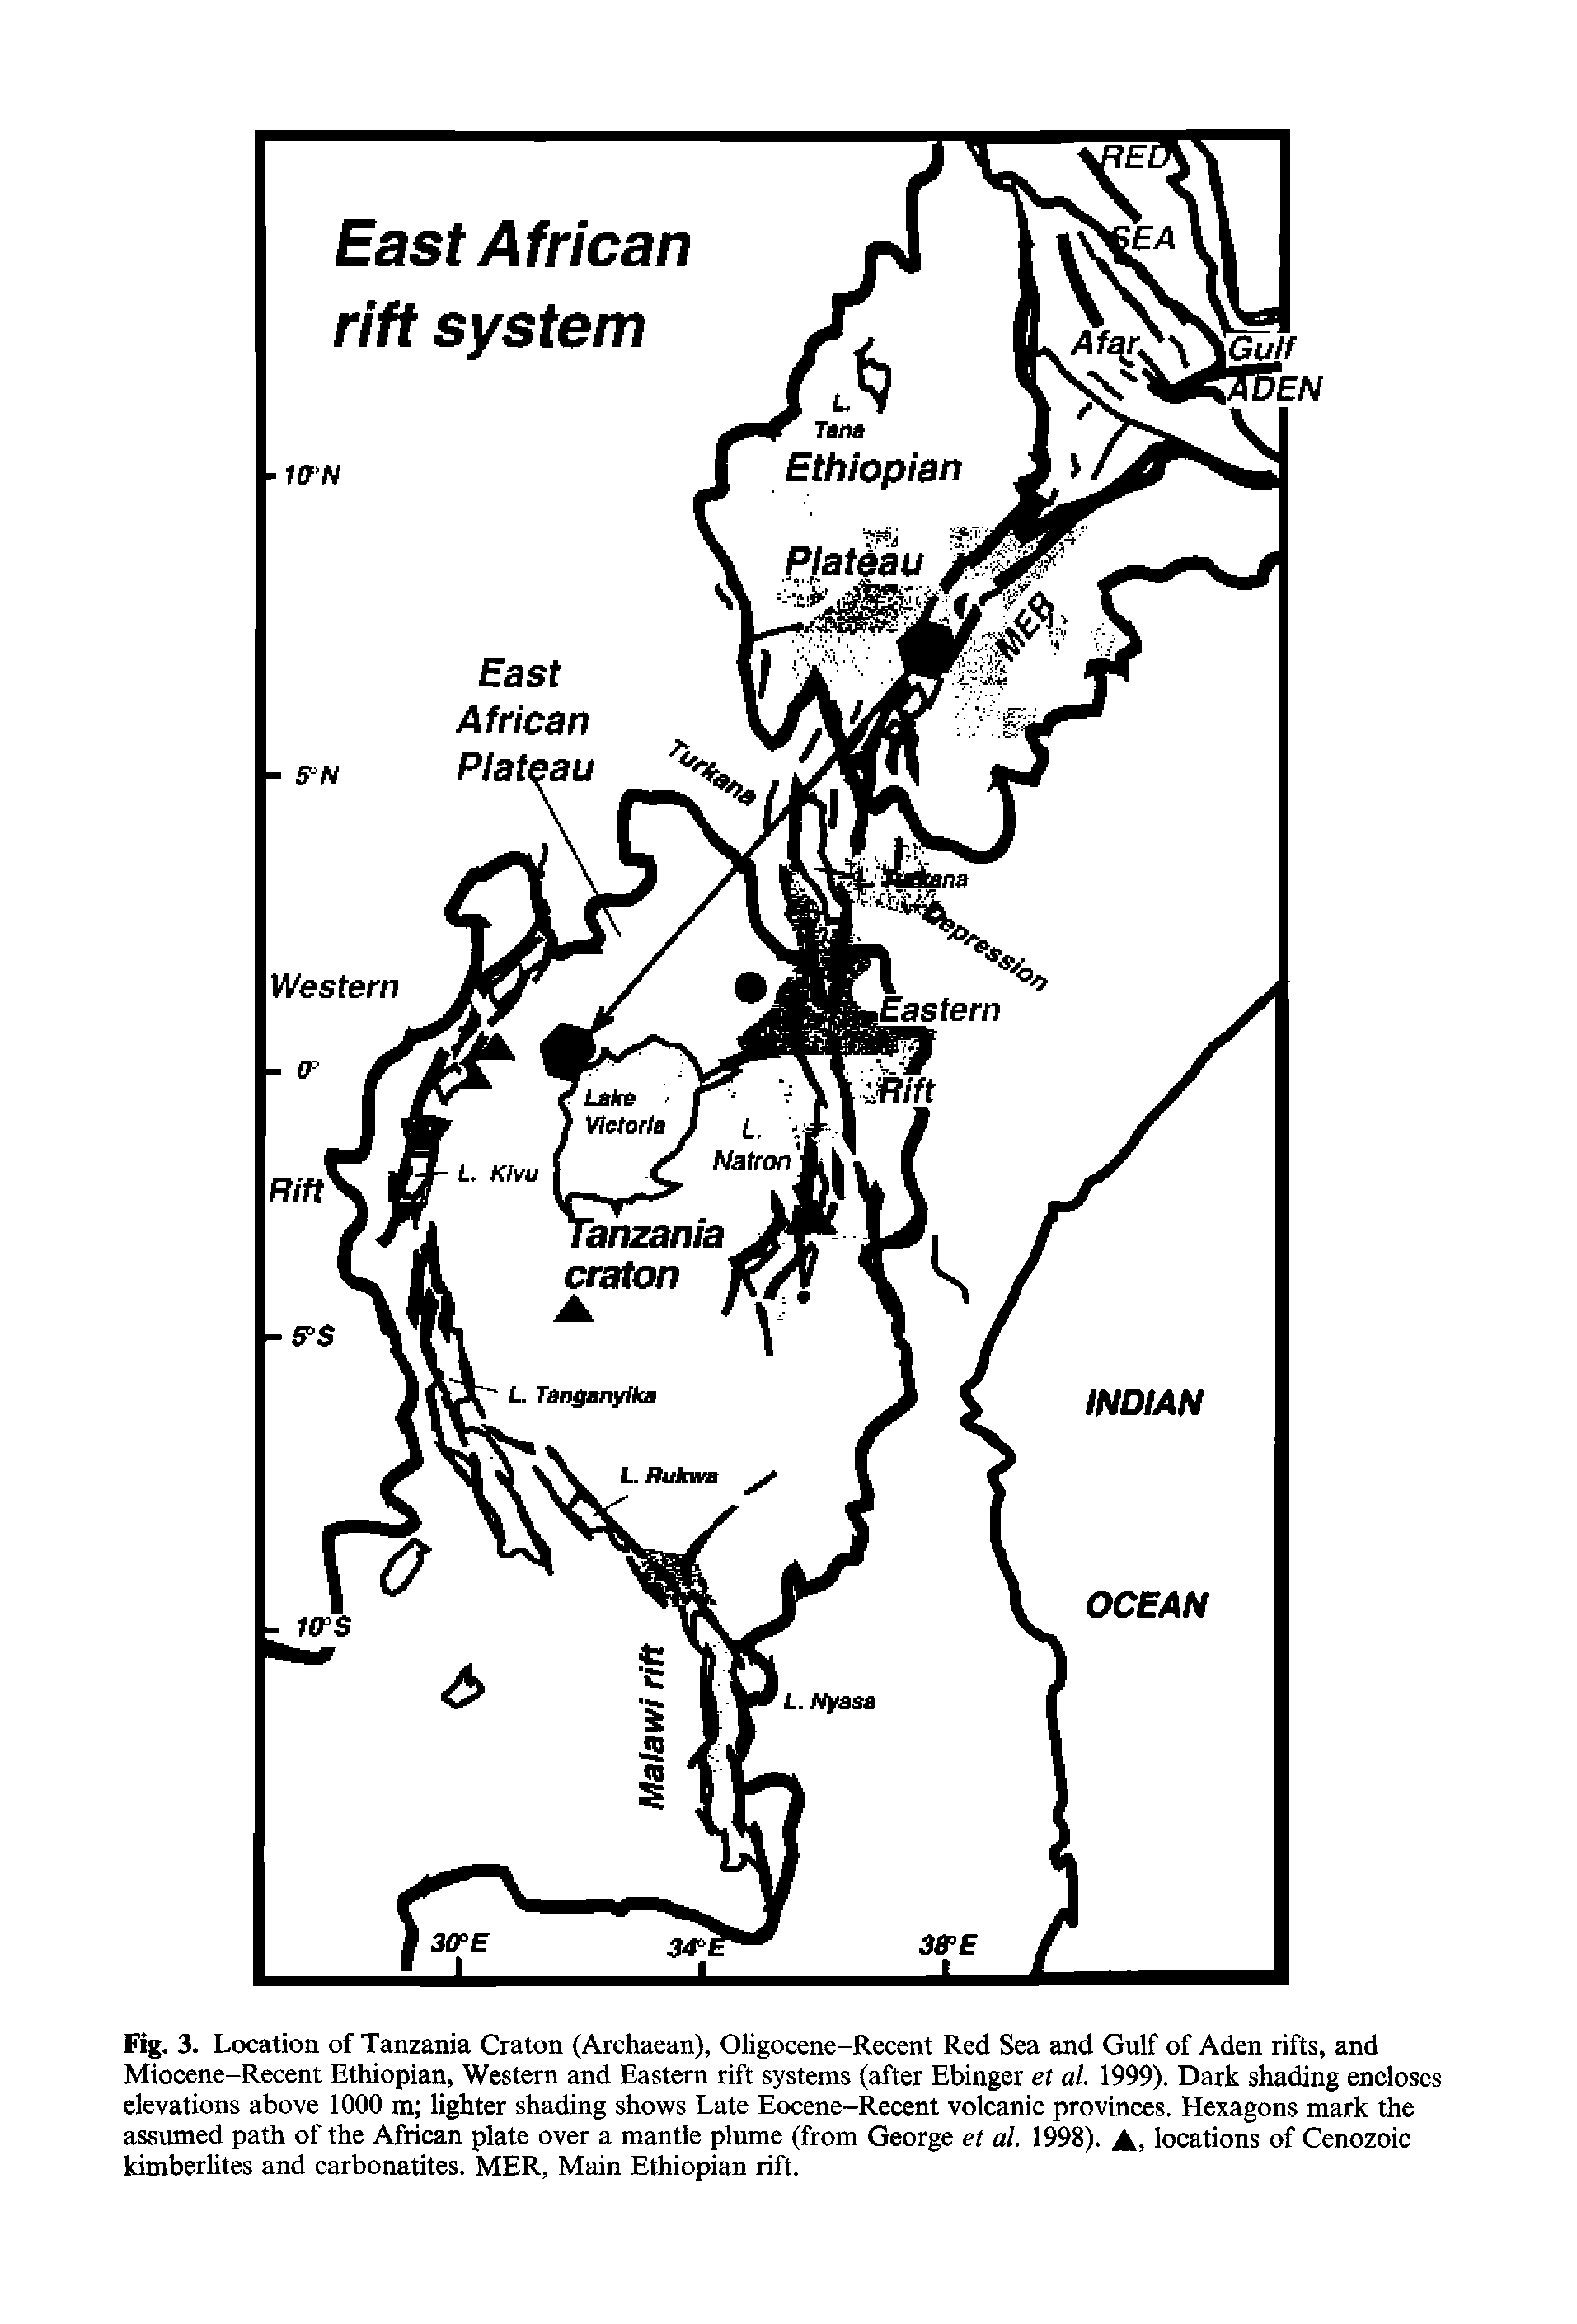 Fig. 3. Location of Tanzania Craton (Archaean), Oligocene-Recent Red Sea and Gulf of Aden rifts, and Miocene-Recent Ethiopian, Western and Eastern rift systems (after Ebinger et at. 1999). Dark shading encloses elevations above 1000 m lighter shading shows Late Eocene-Recent volcanic provinces. Hexagons mark the assumed path of the African plate over a mantle plume (from George et at. 1998). A, locations of Cenozoic kimberlites and carbonatites. MER, Main Ethiopian rift.